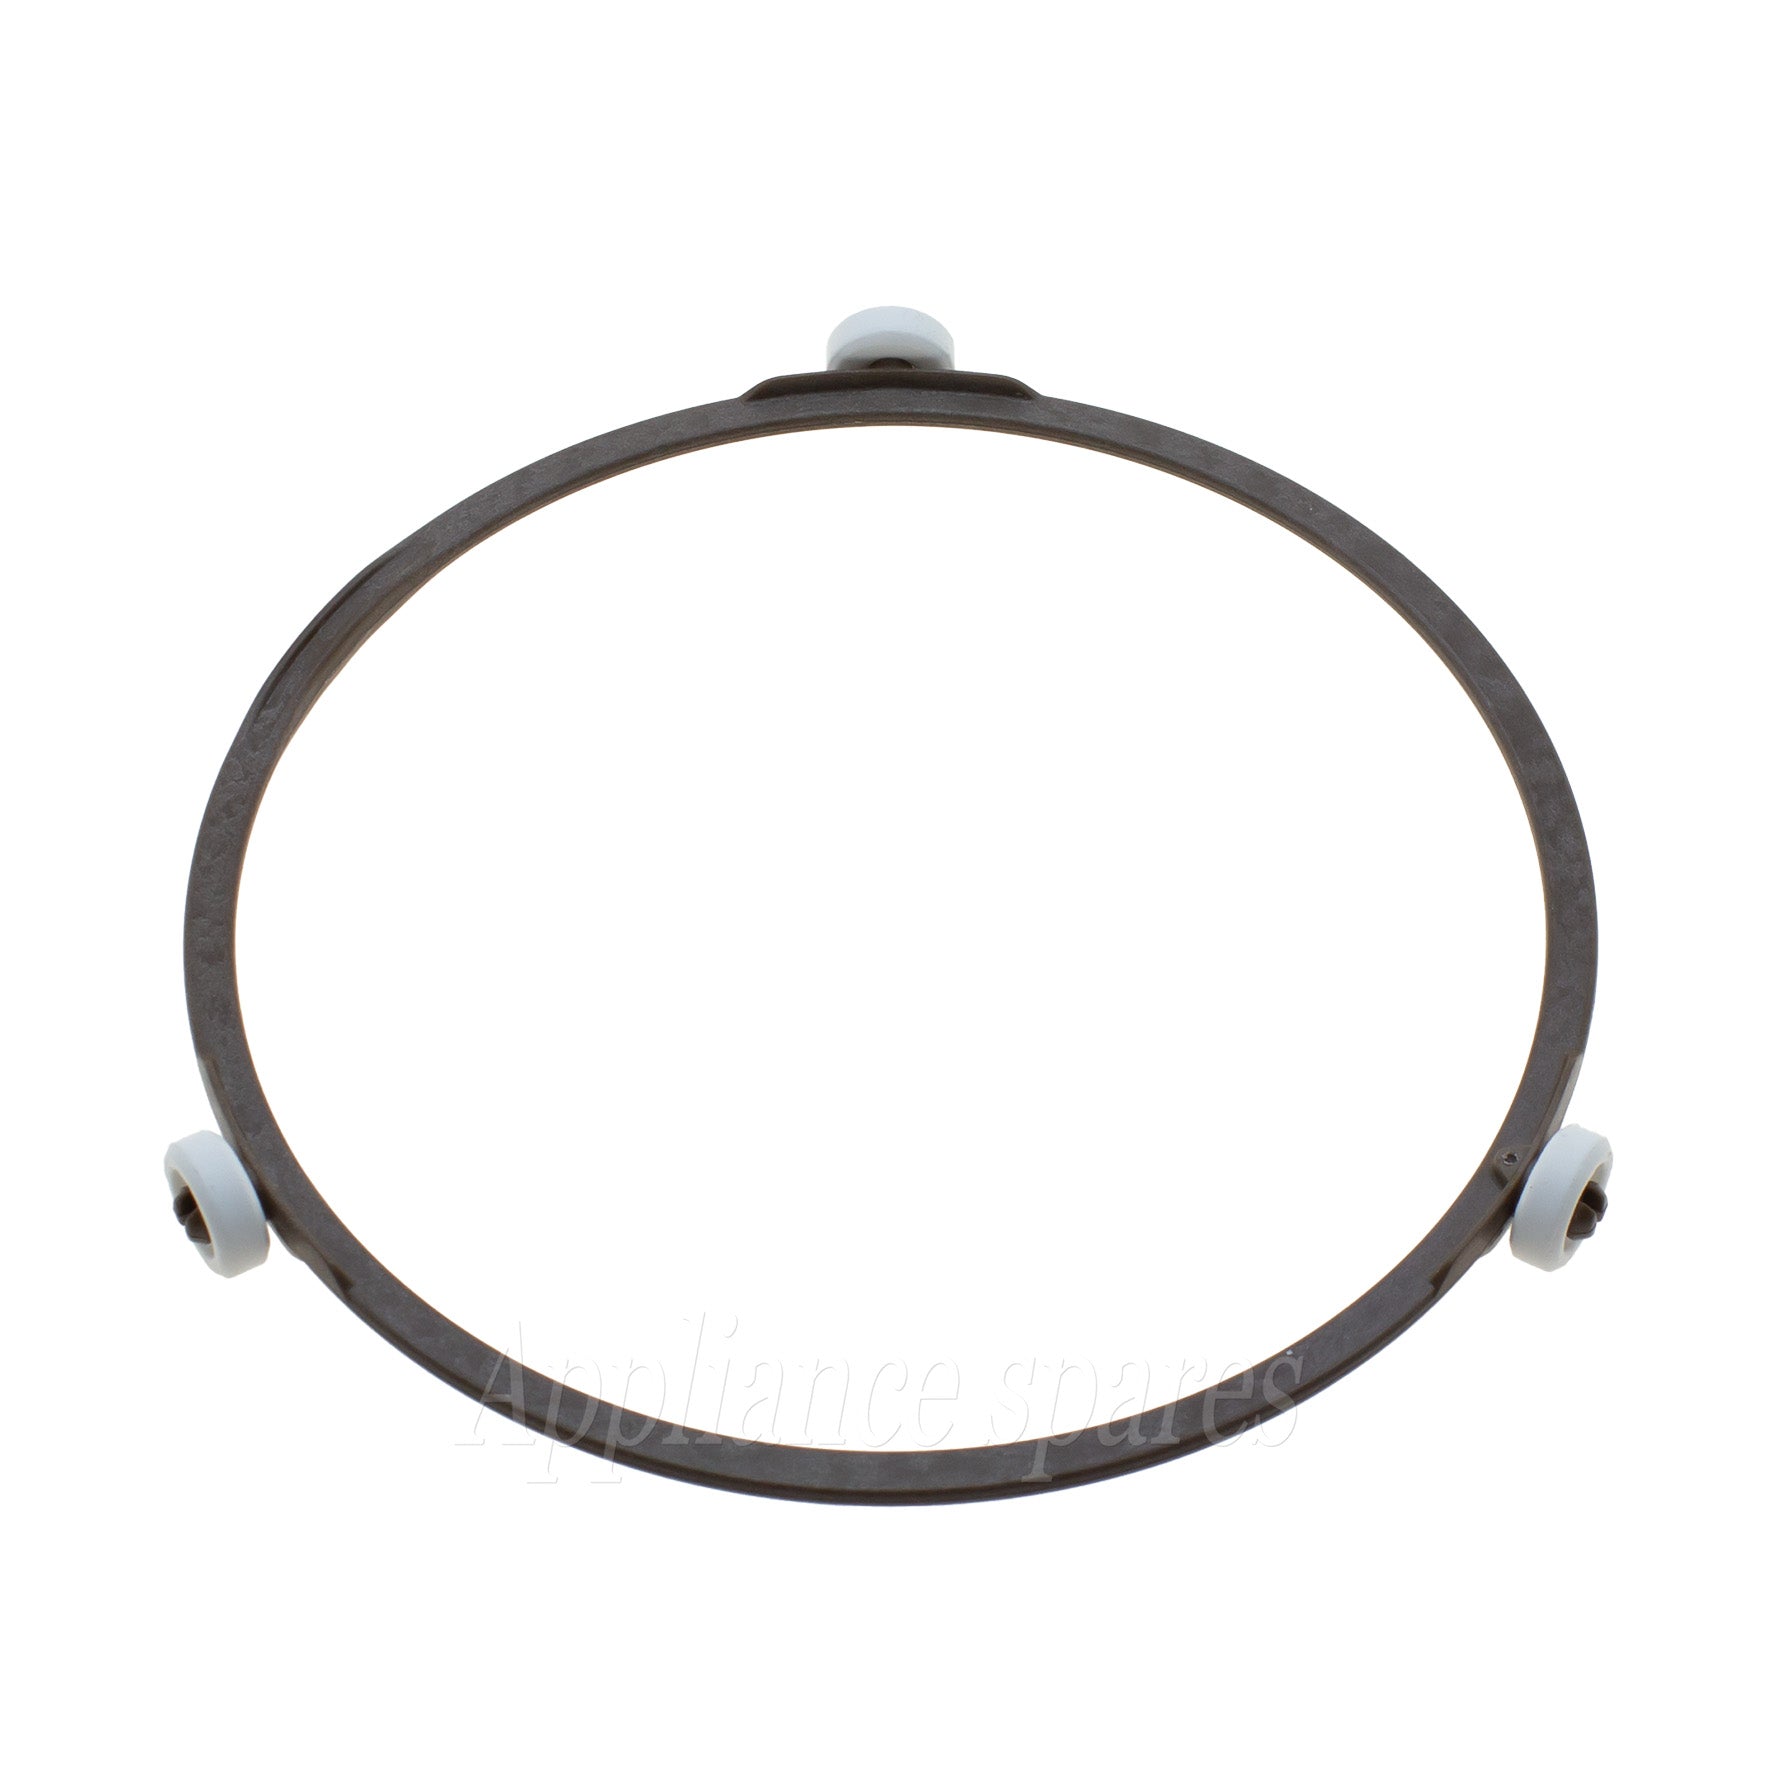 Defy Microwave Oven Roller Ring